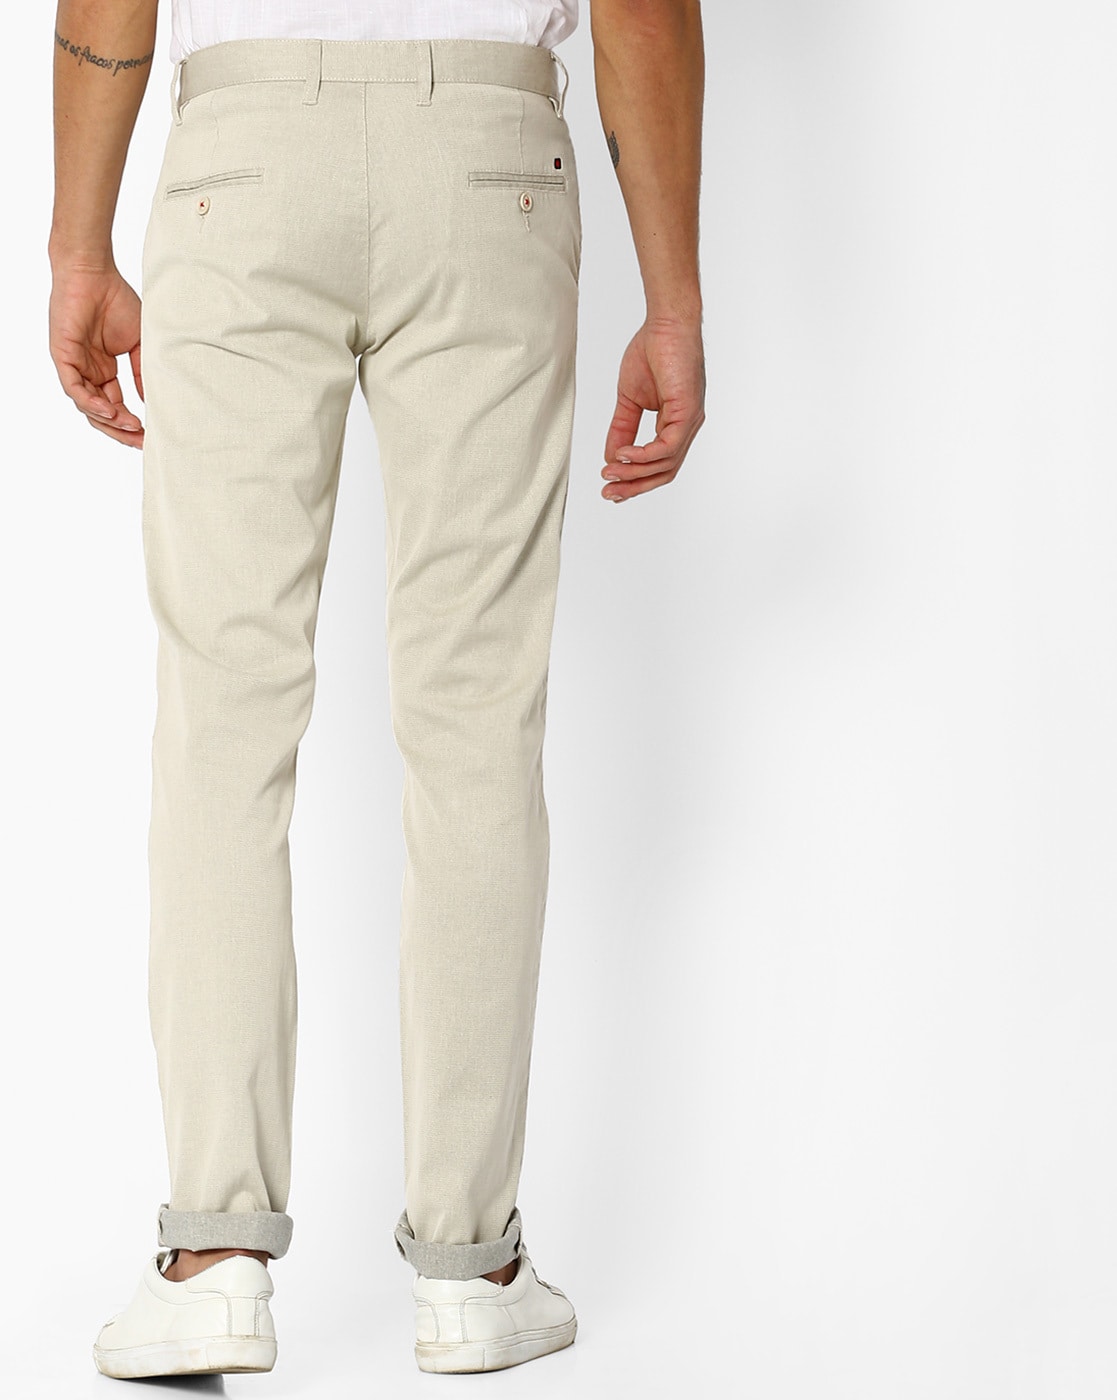 Buy United Colors of Benetton Kids Beige Textured Trousers for Boys  Clothing Online  Tata CLiQ